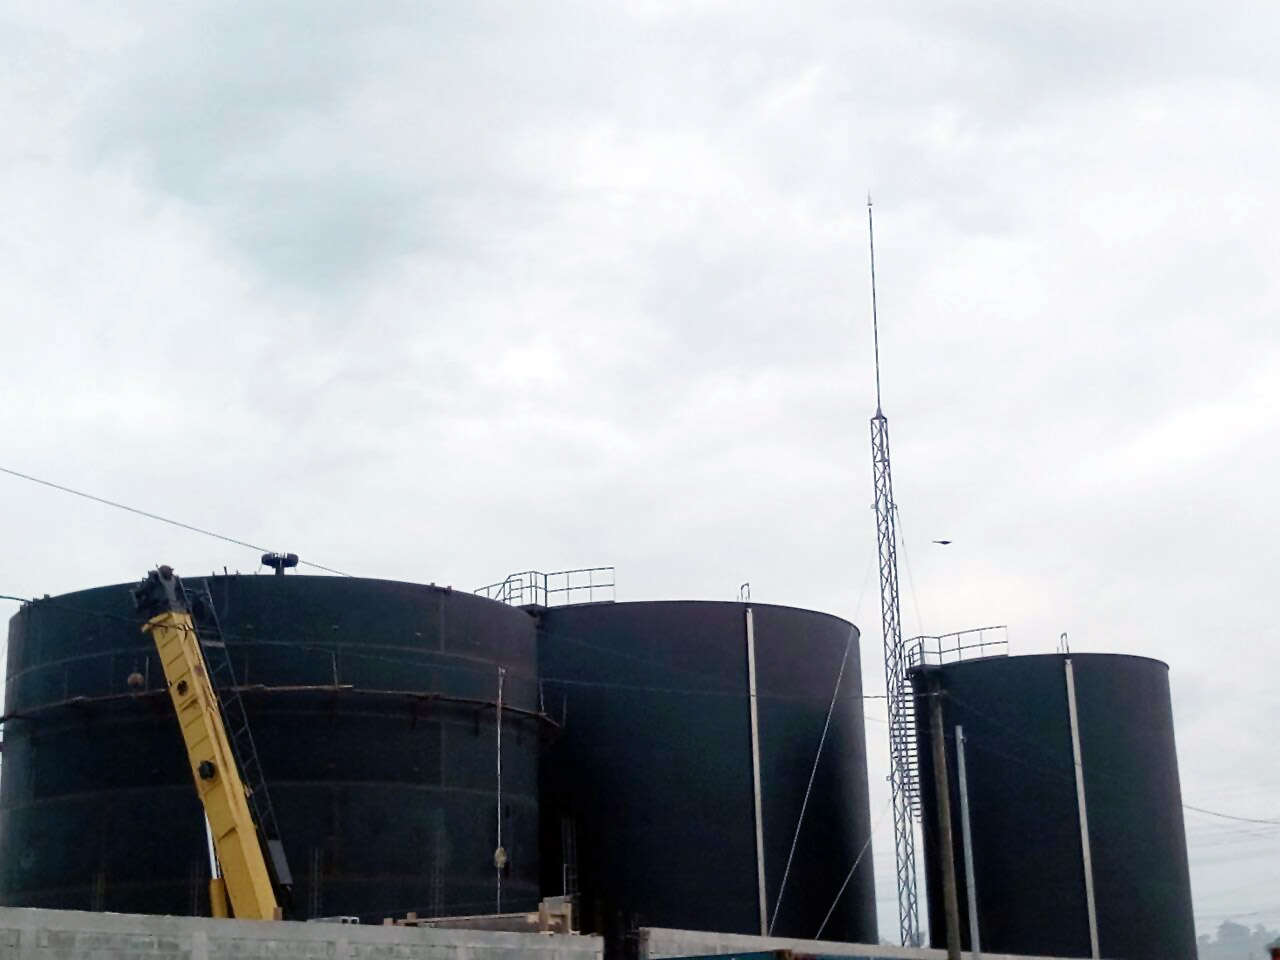 Aplicaciones Tecnológicas protects oil storage tanks in Guatemala with its lightning rods